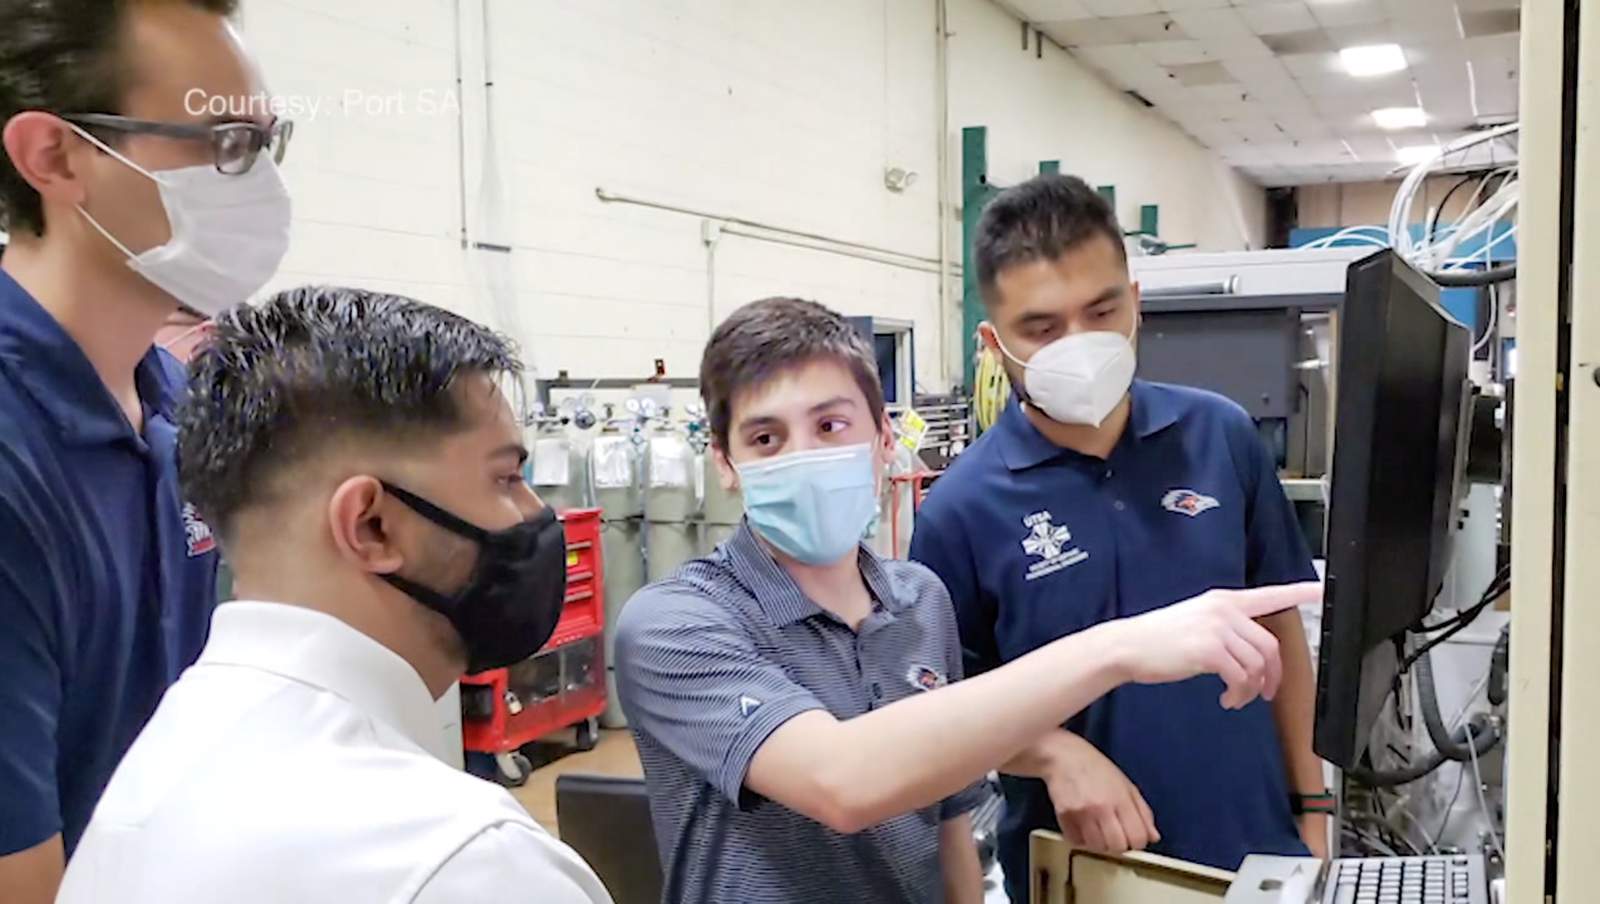 UTSA students, Intertek collaborate in developing new system to test exhaust emissions